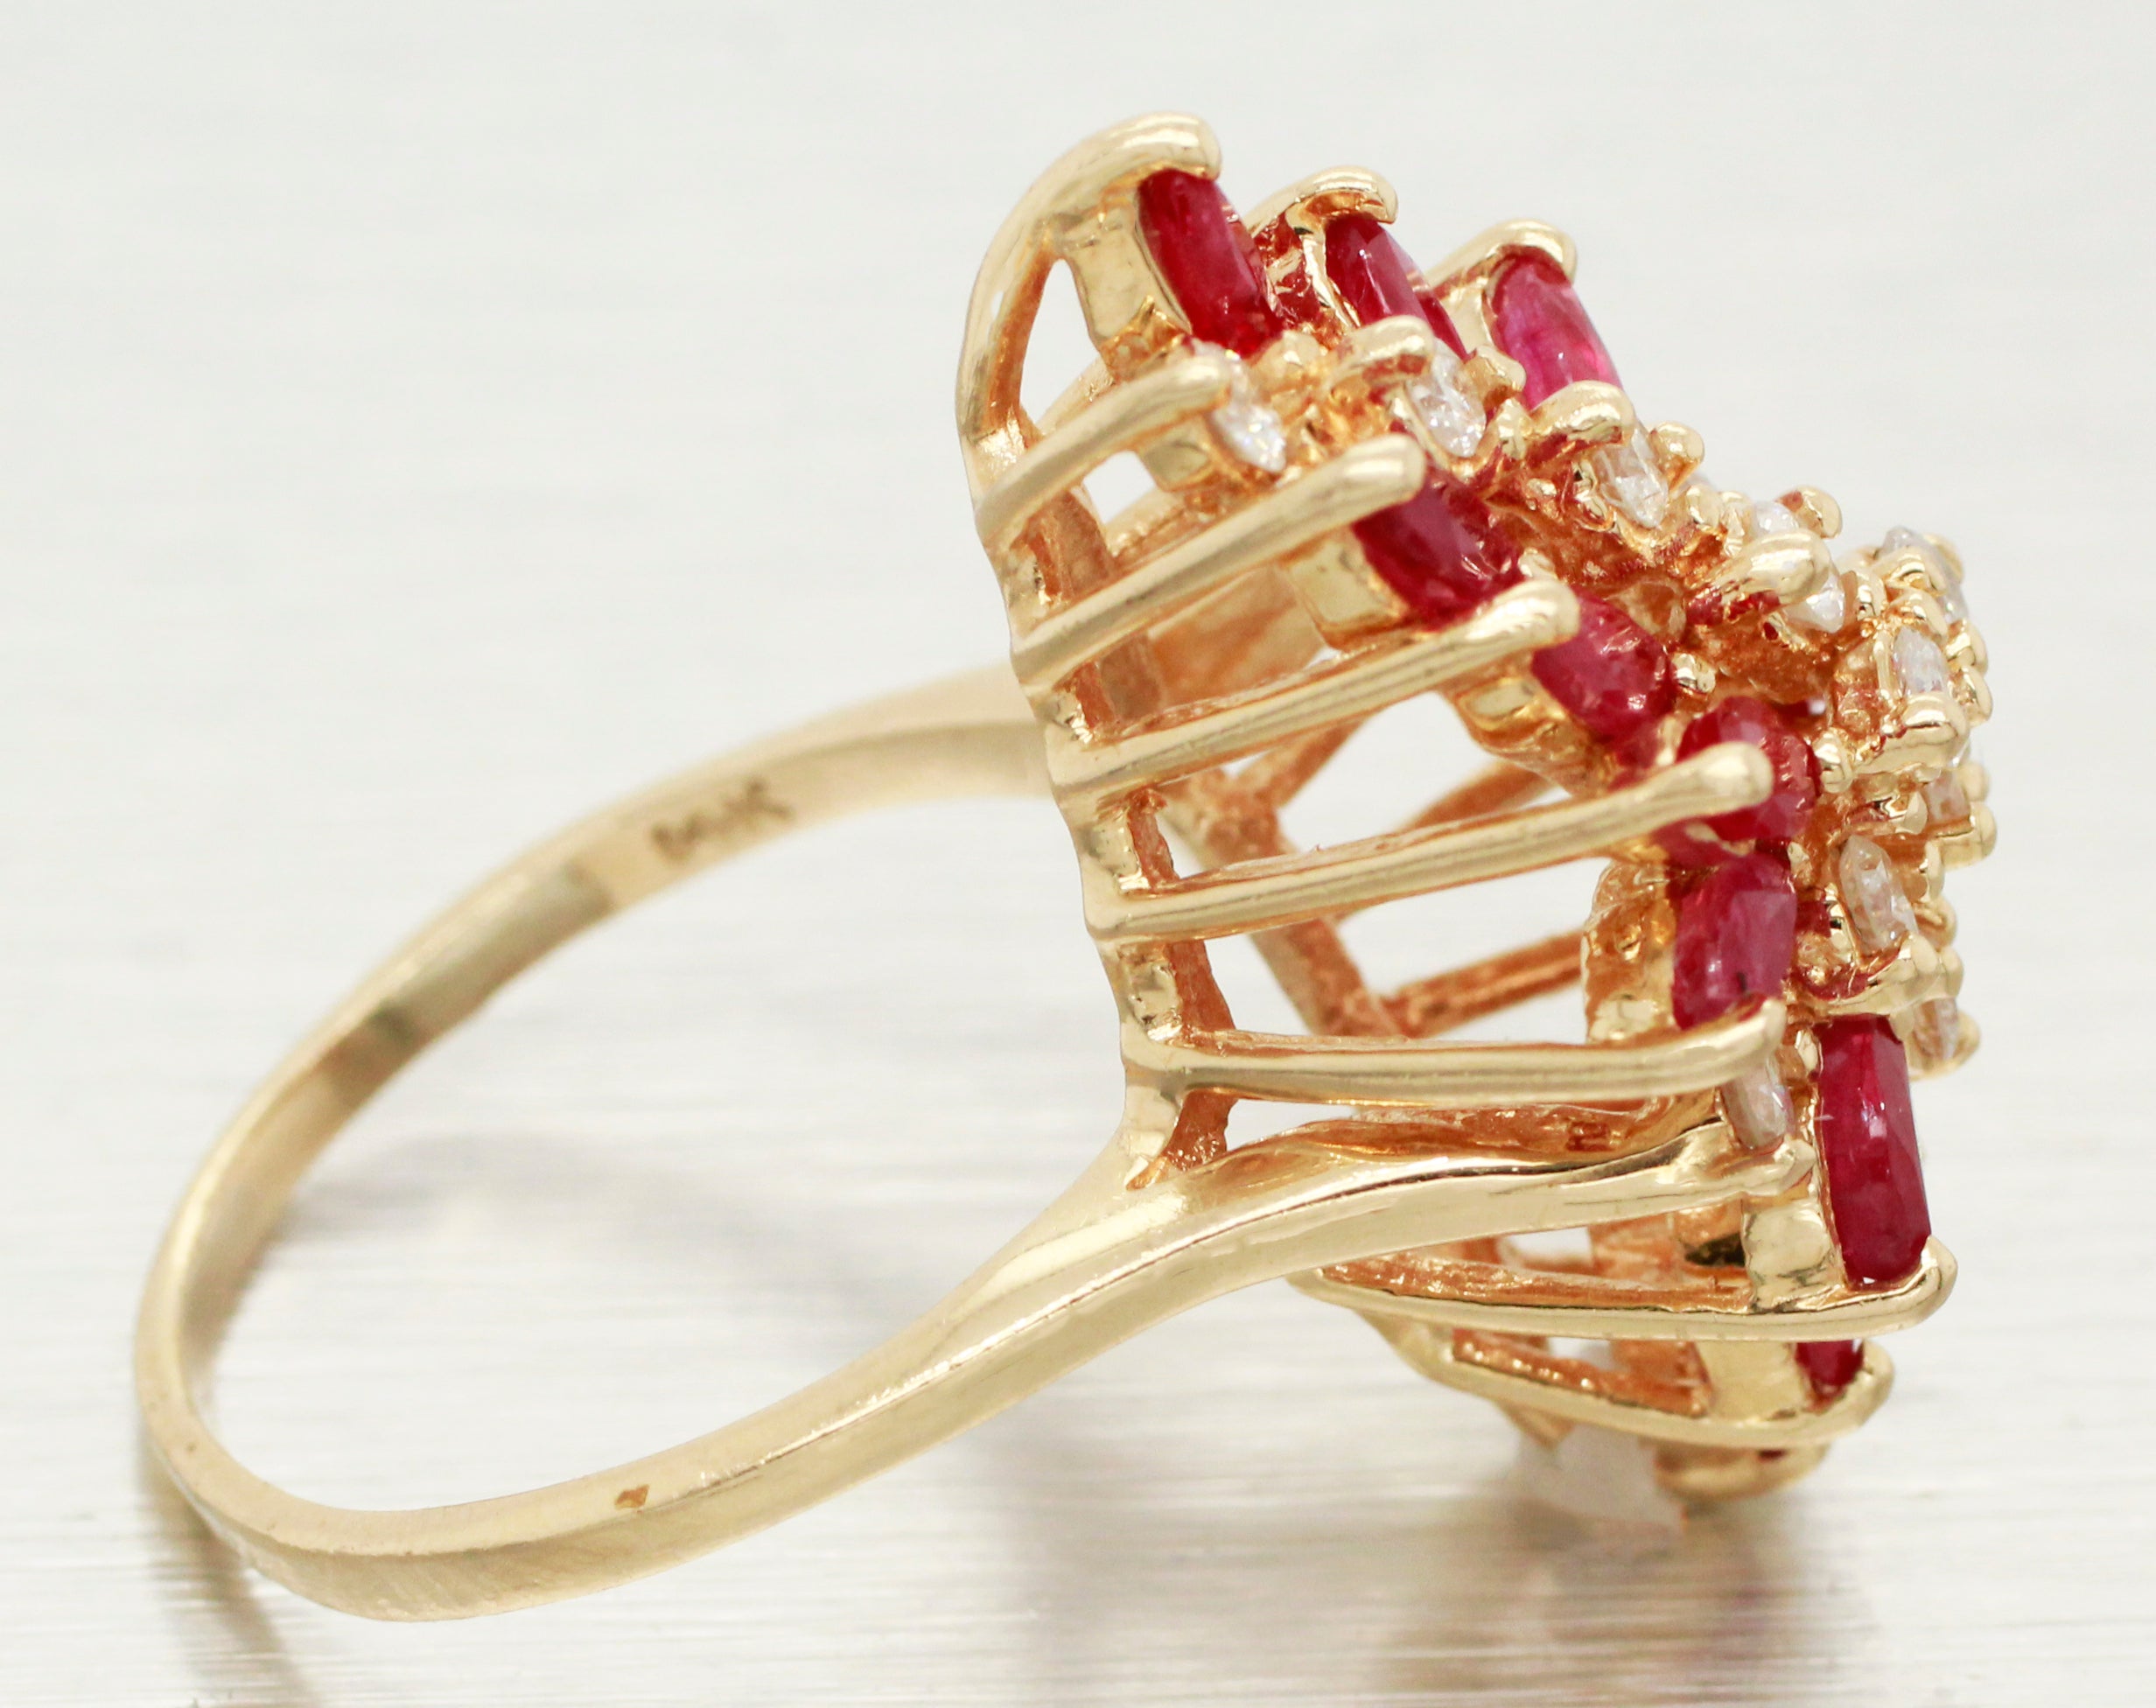 Antique Art Deco 1.40ctw Ruby & Diamond Marquise Cocktail Ring - 14k Yellow Gold